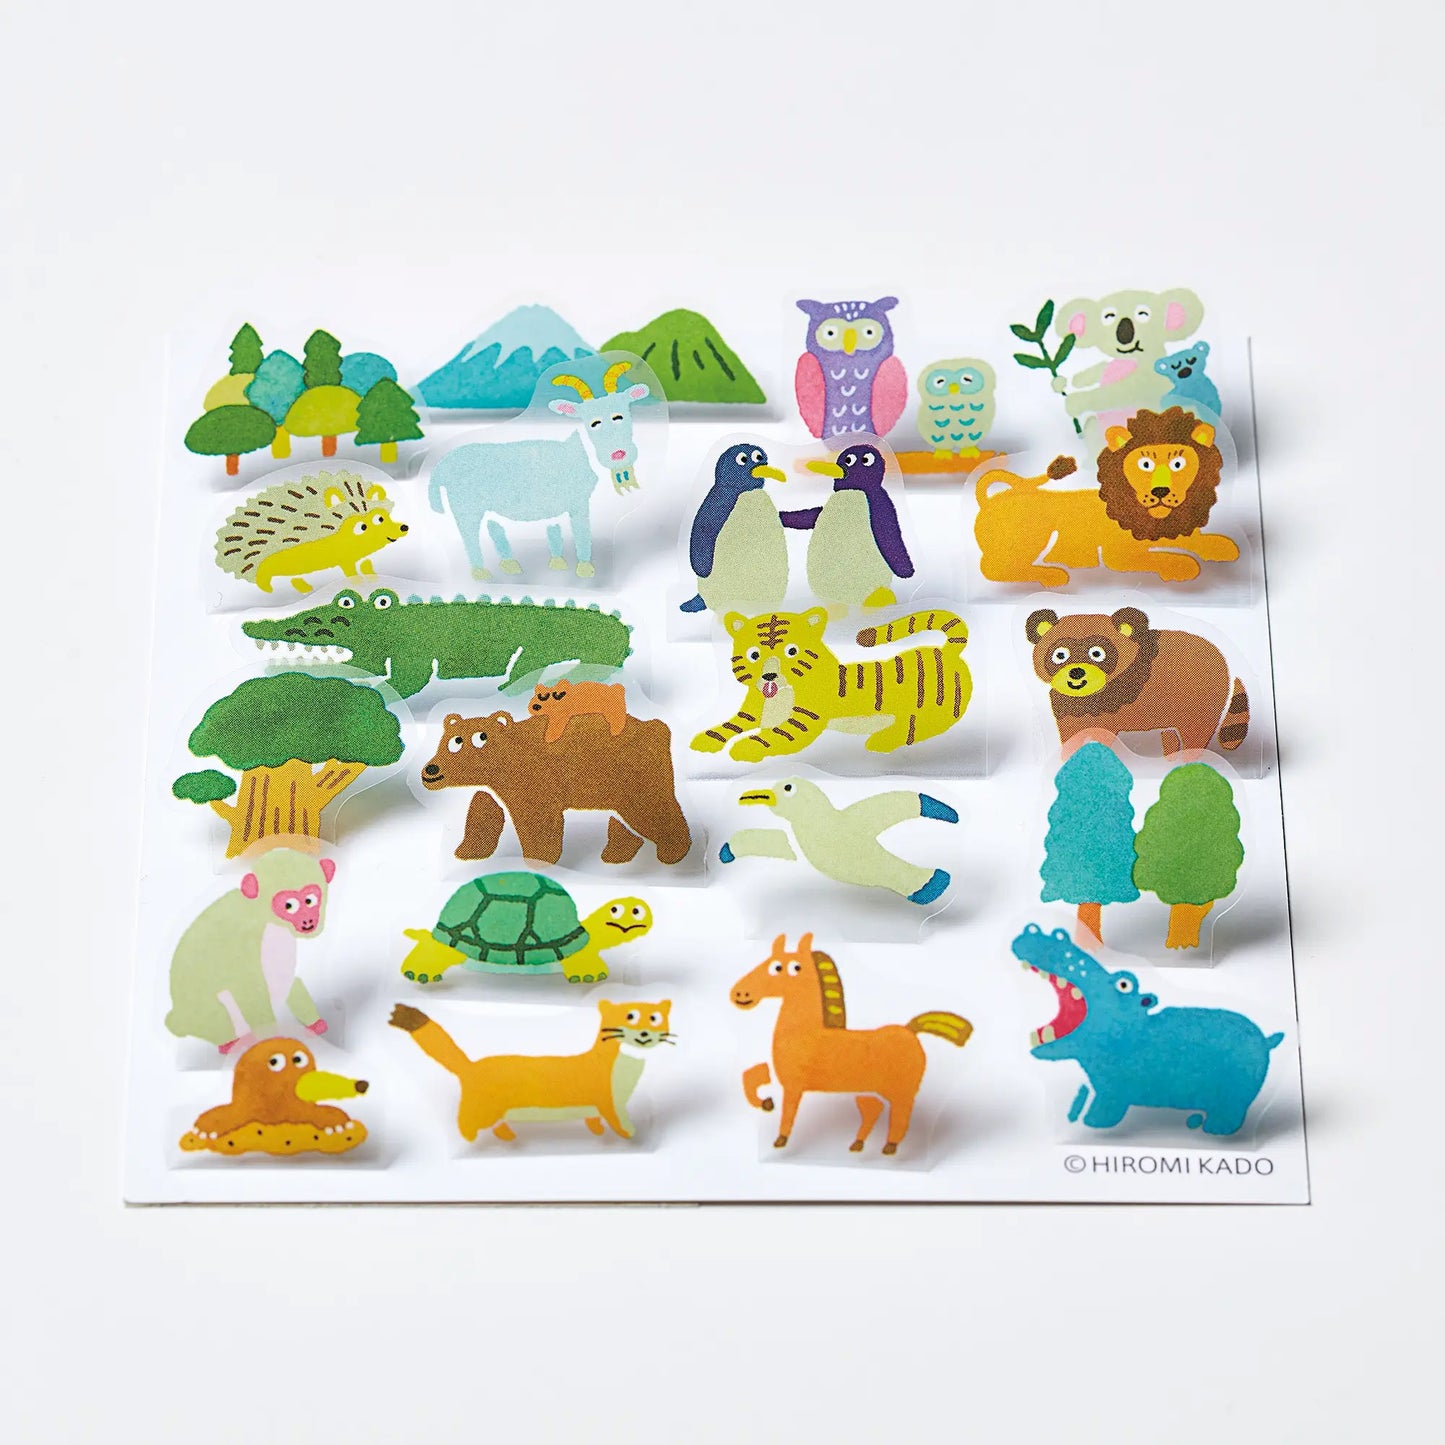 NEW // POP-UP Stickers - 3D Decorative Stickers